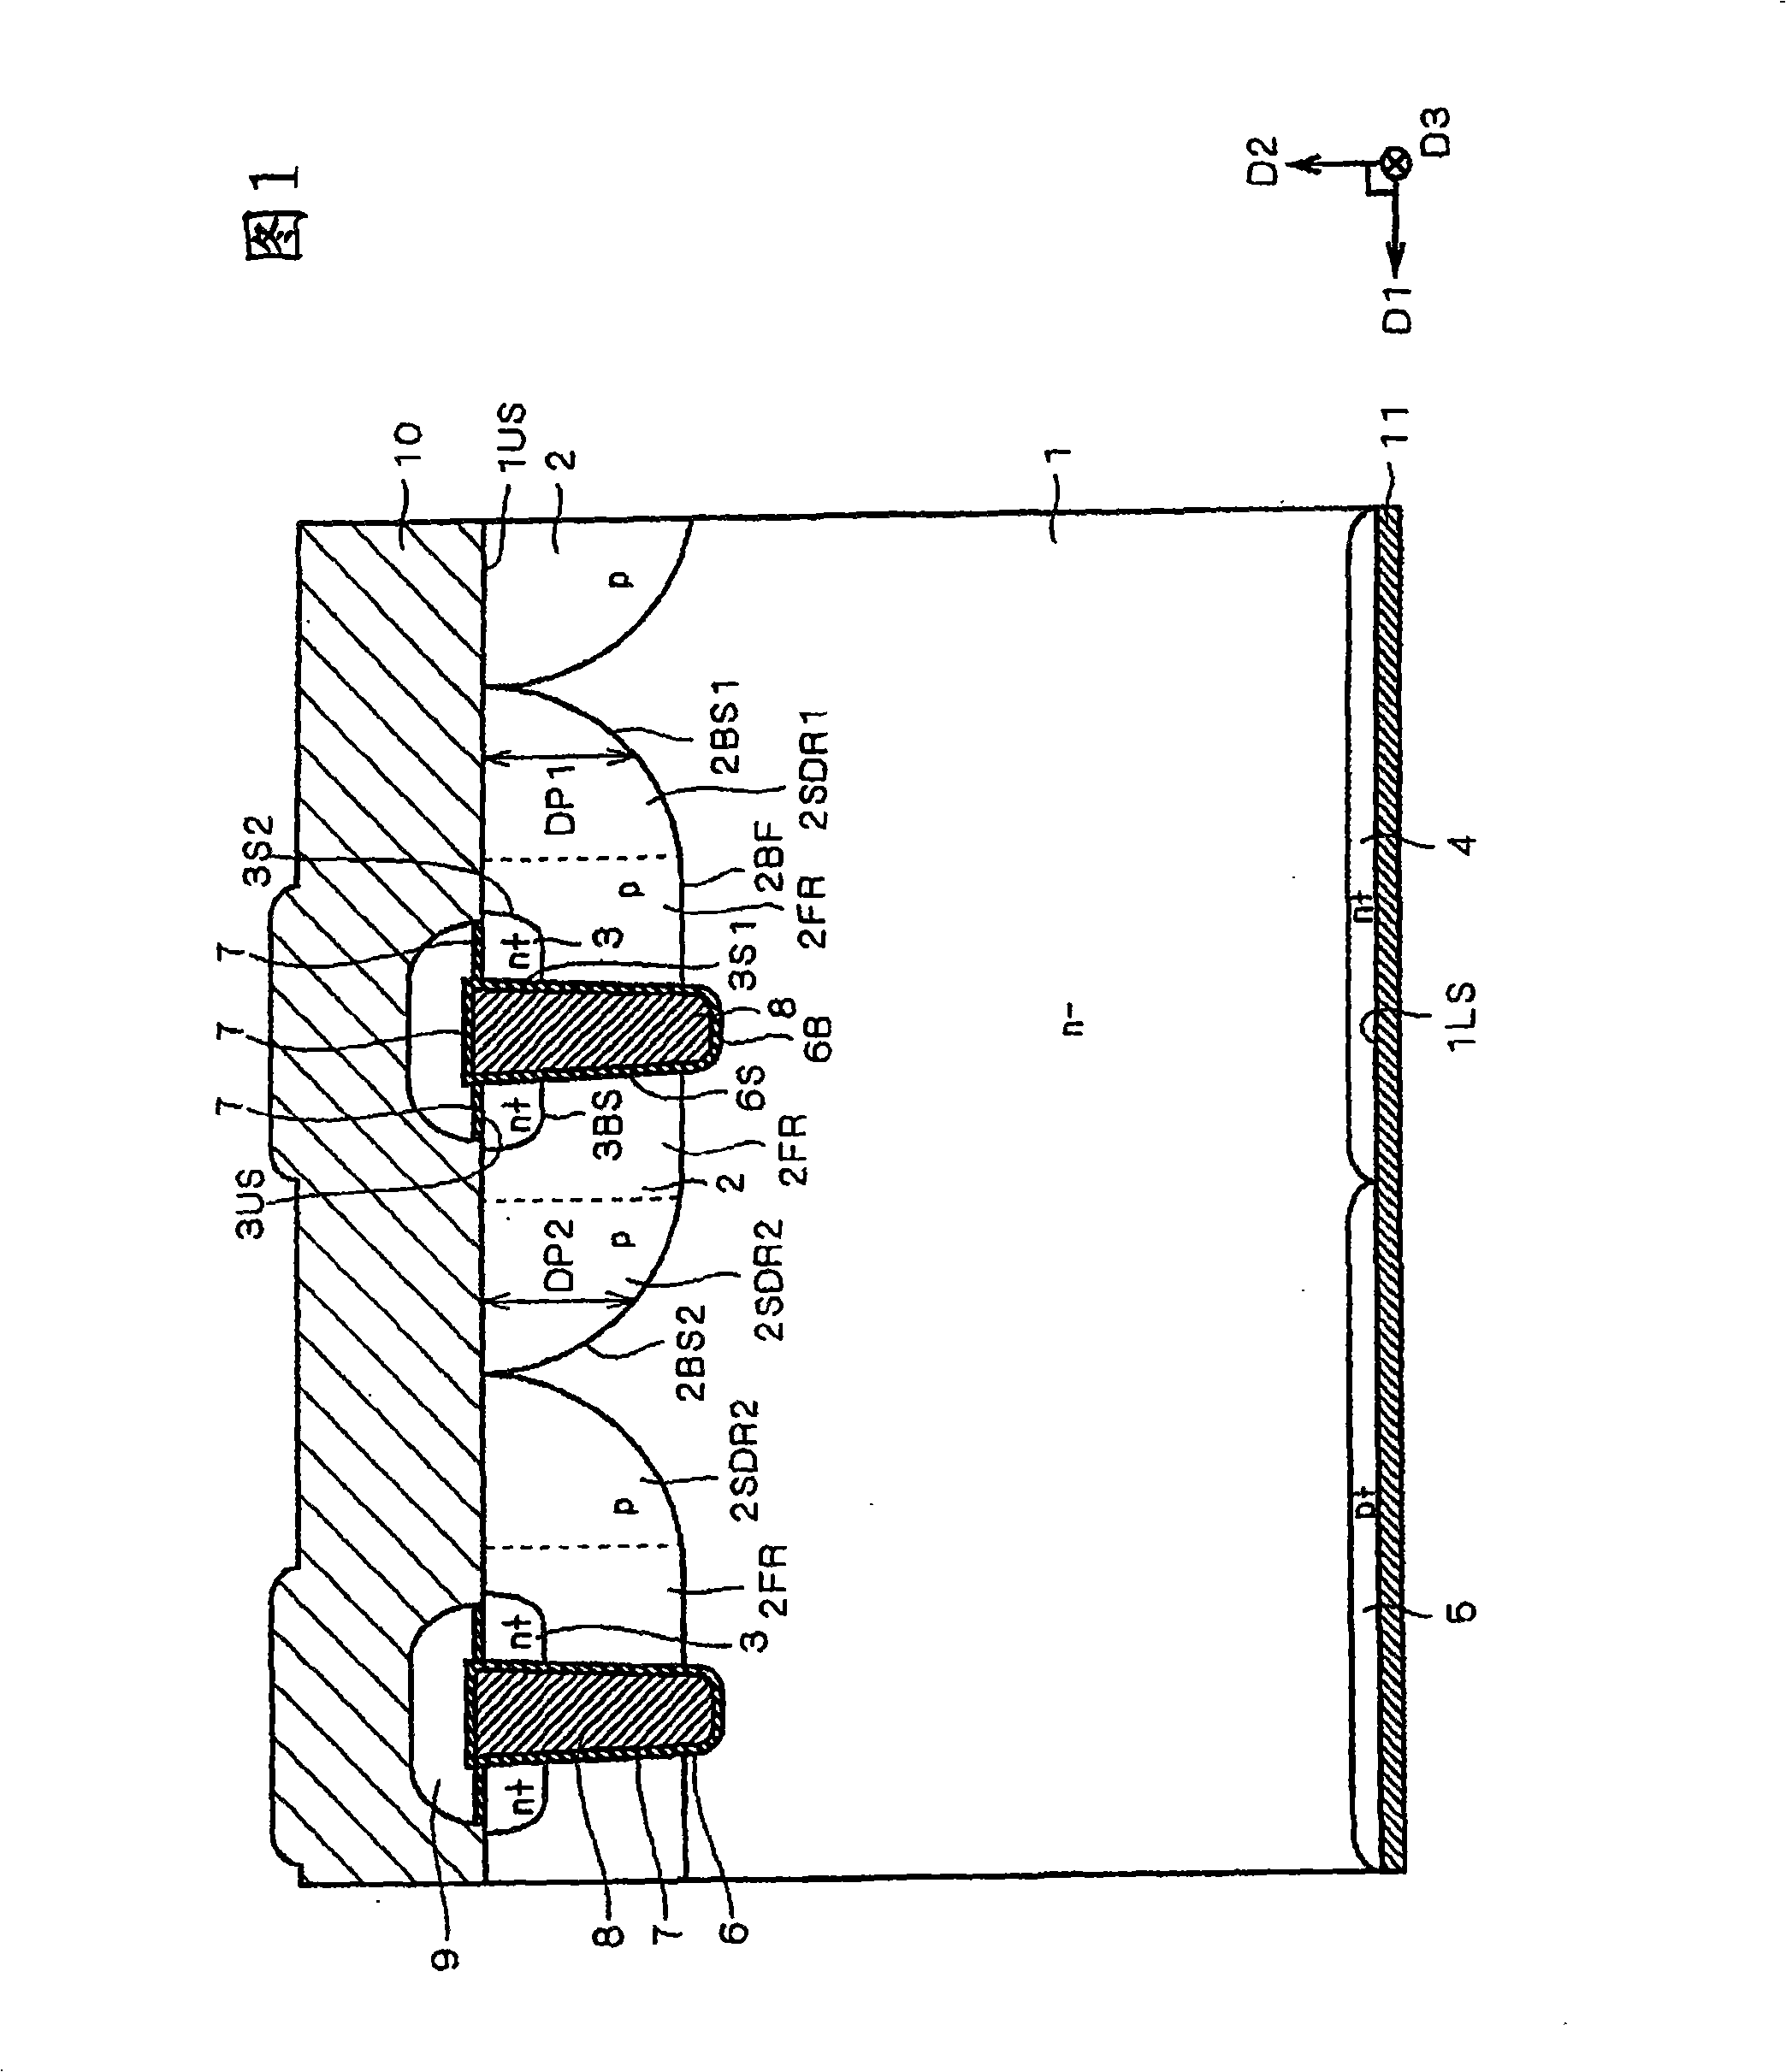 Insulated gate transistor incorporating diode and inverter circuit